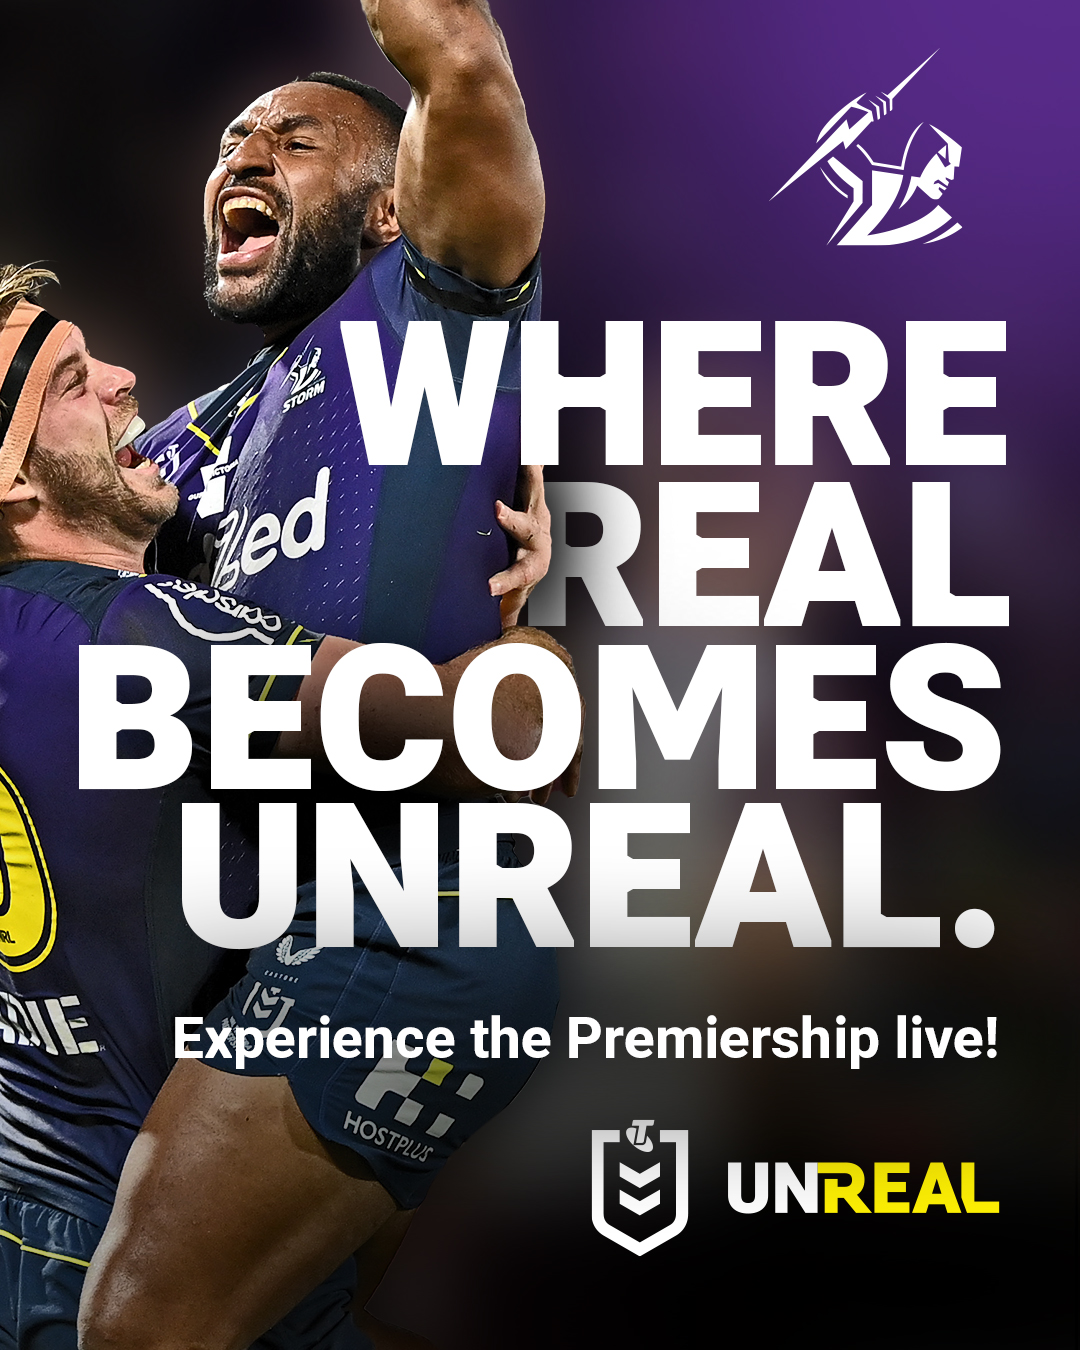 It’s All the 'Real' That Makes Rugby League So 'Unreal' in NRL's Creative Platform from Emotive.